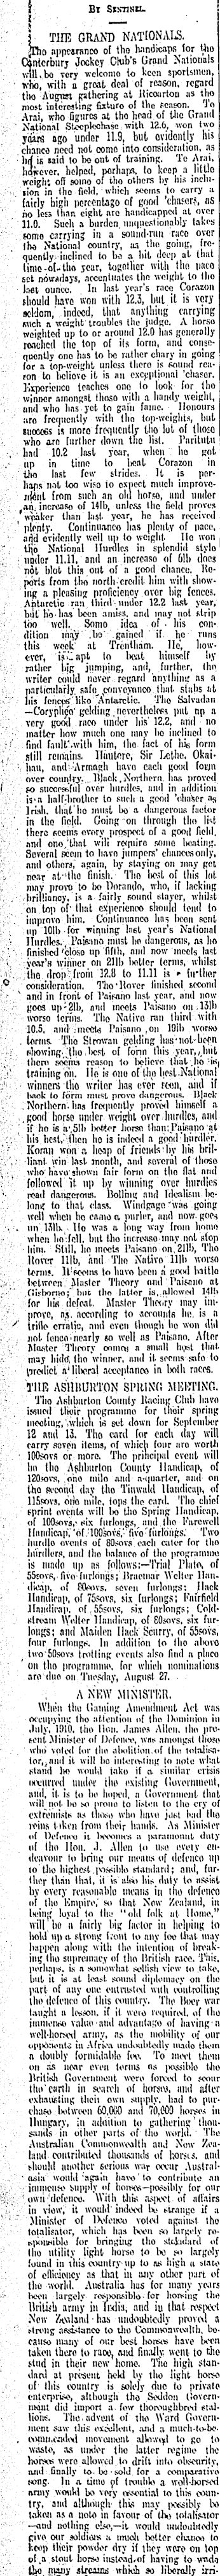 Papers Past | Newspapers | Otago Daily Times | 18 July 1912 | SPORTING AND  SPORTS.